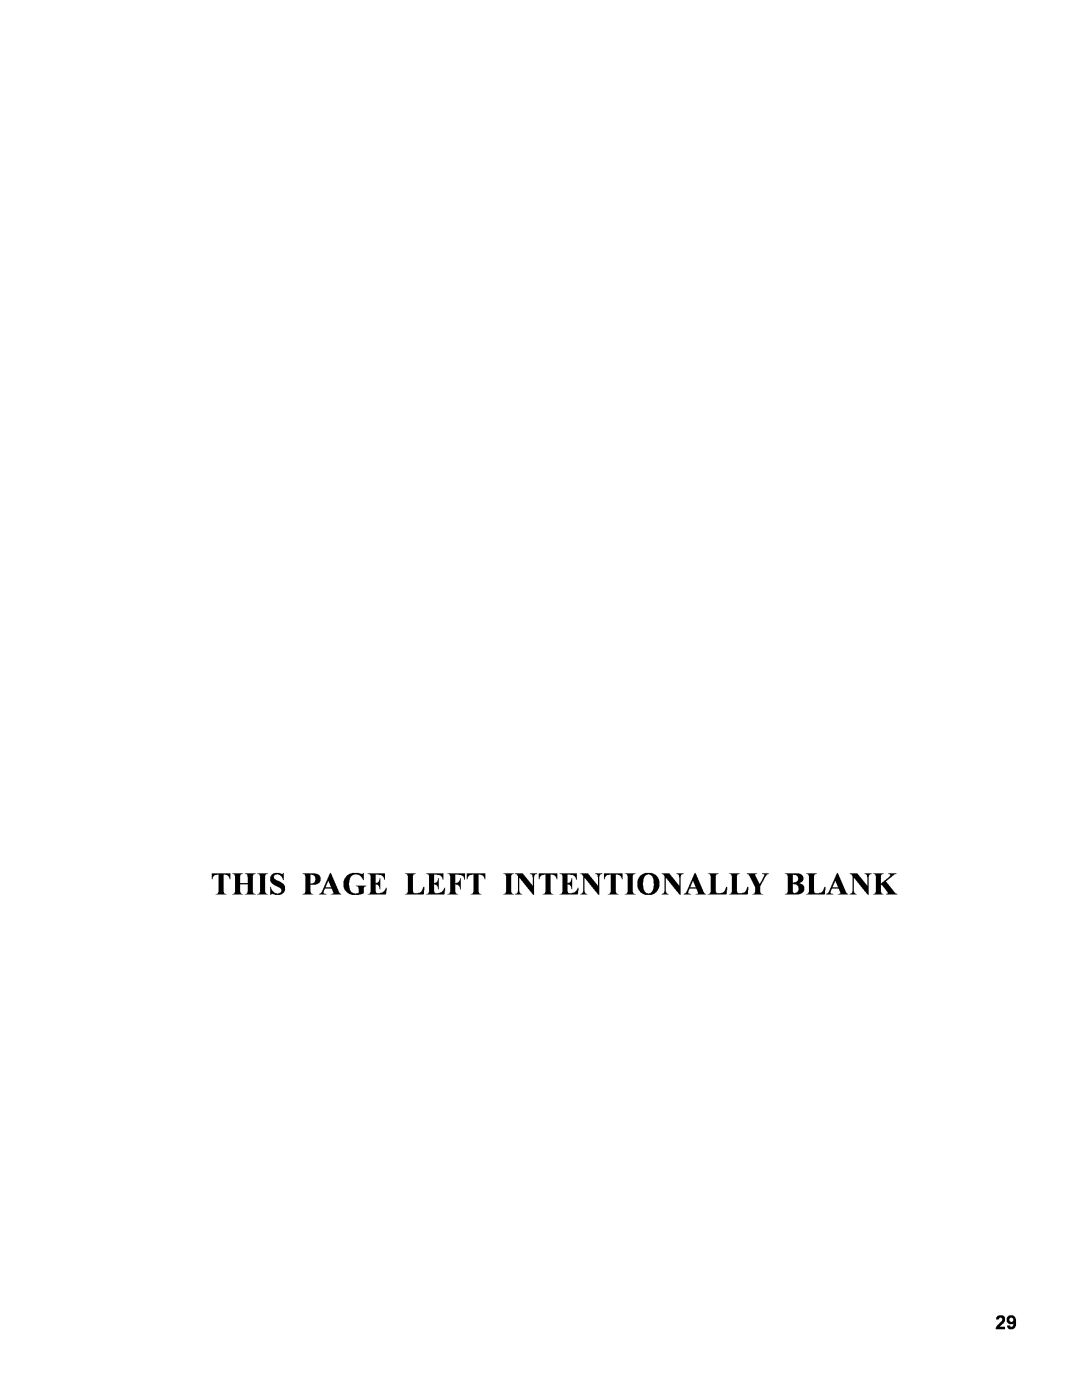 Burnham IN10 manual This Page Left Intentionally Blank 